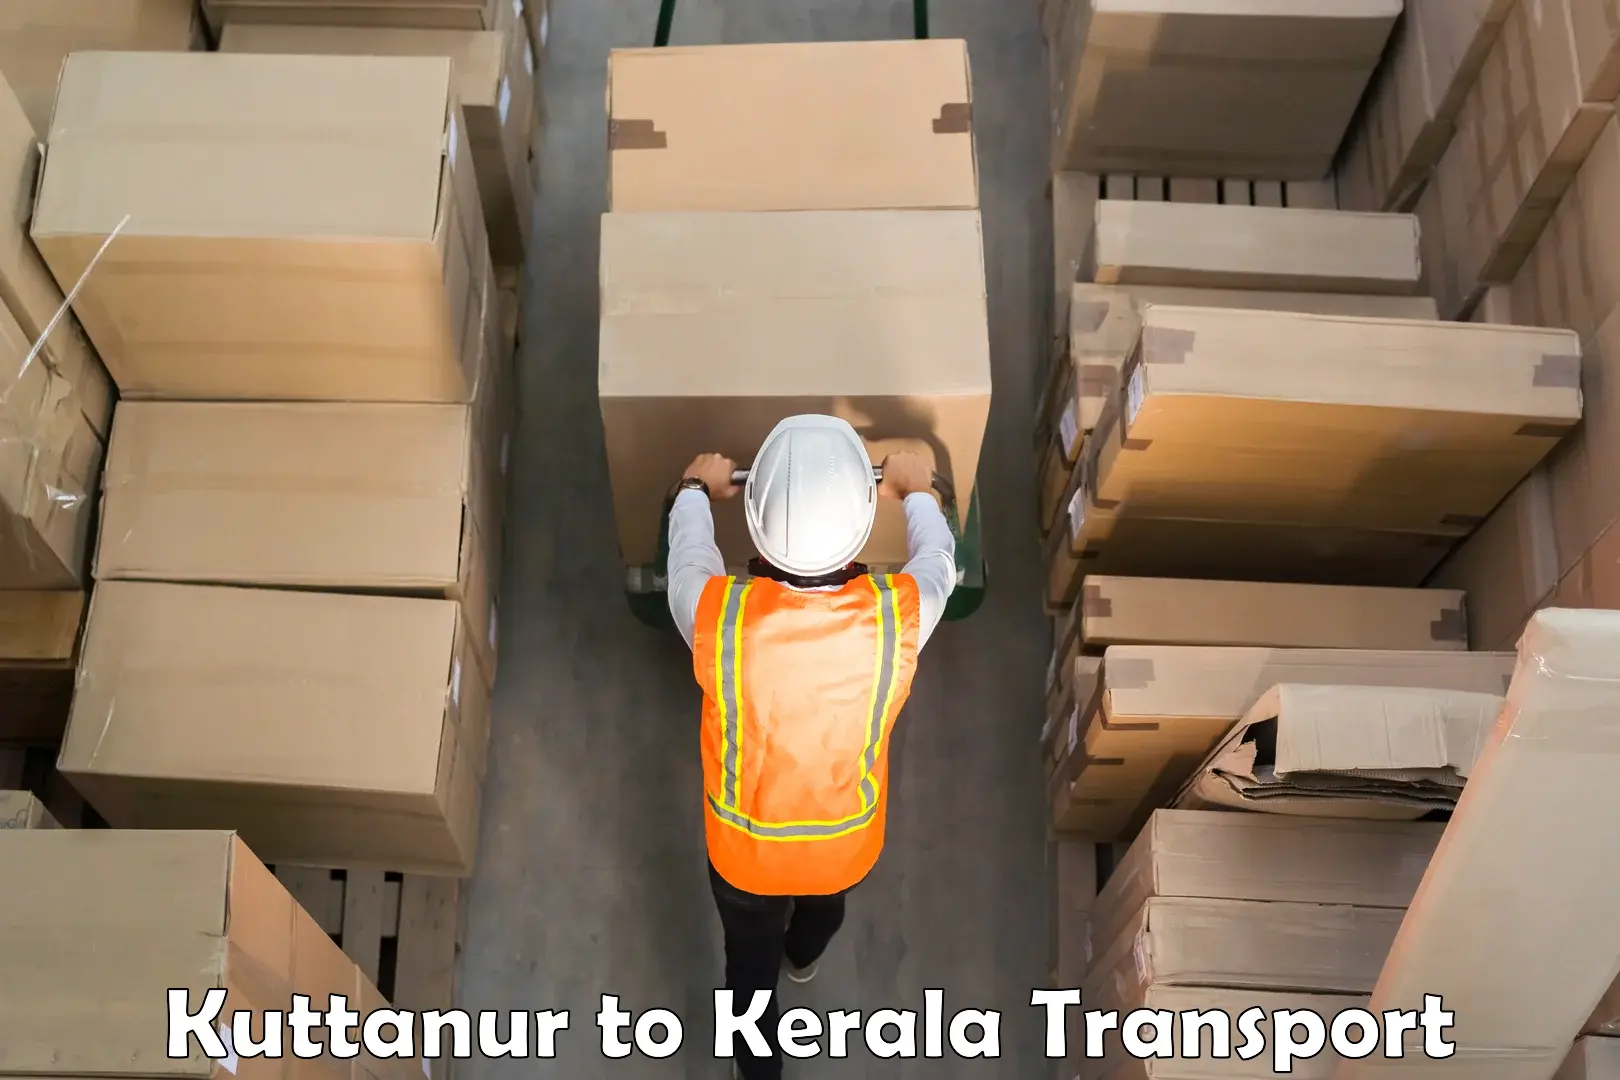 Truck transport companies in India Kuttanur to Iritty